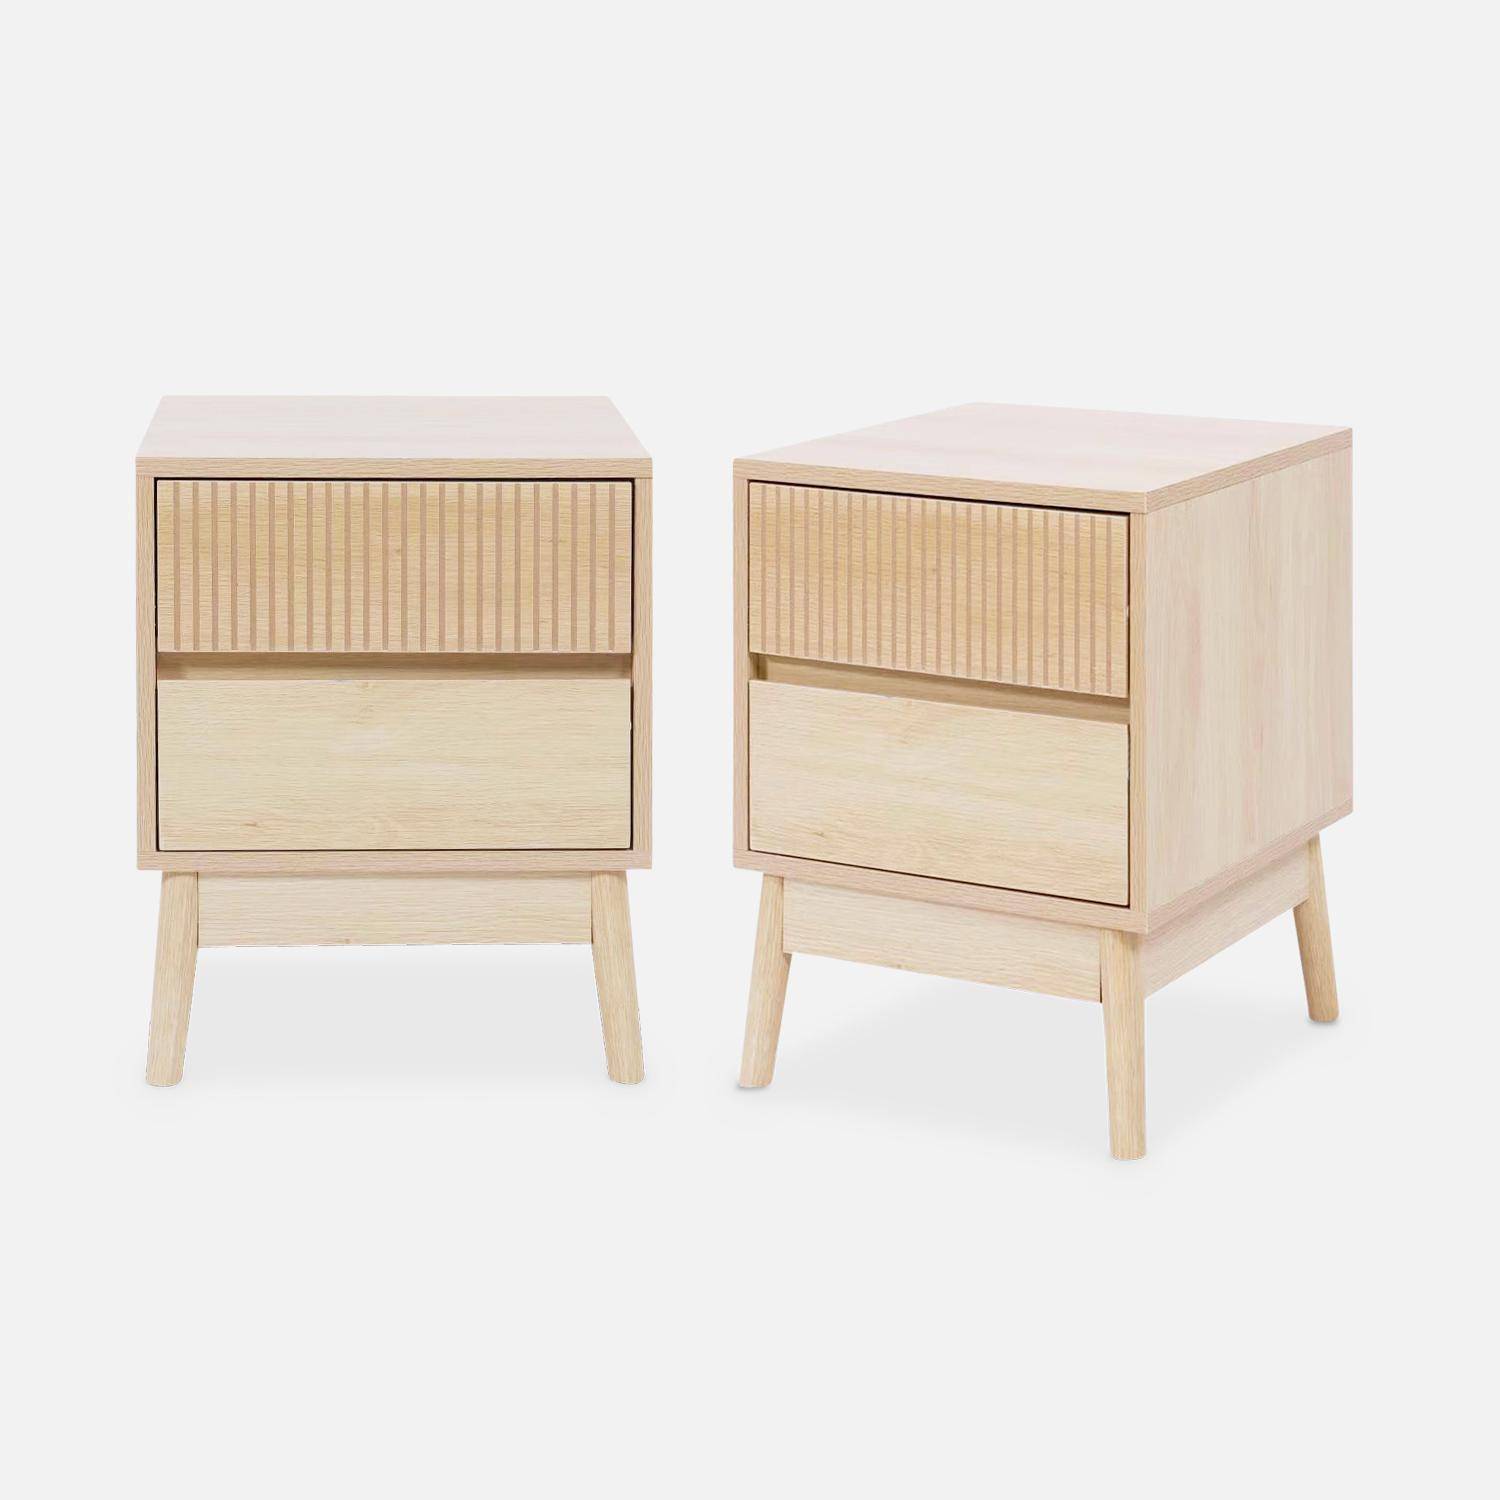 Pair of grooved wooden bedside tables with 2 drawers, 40x39x48cm - Linear - Natural Wood colour,sweeek,Photo1